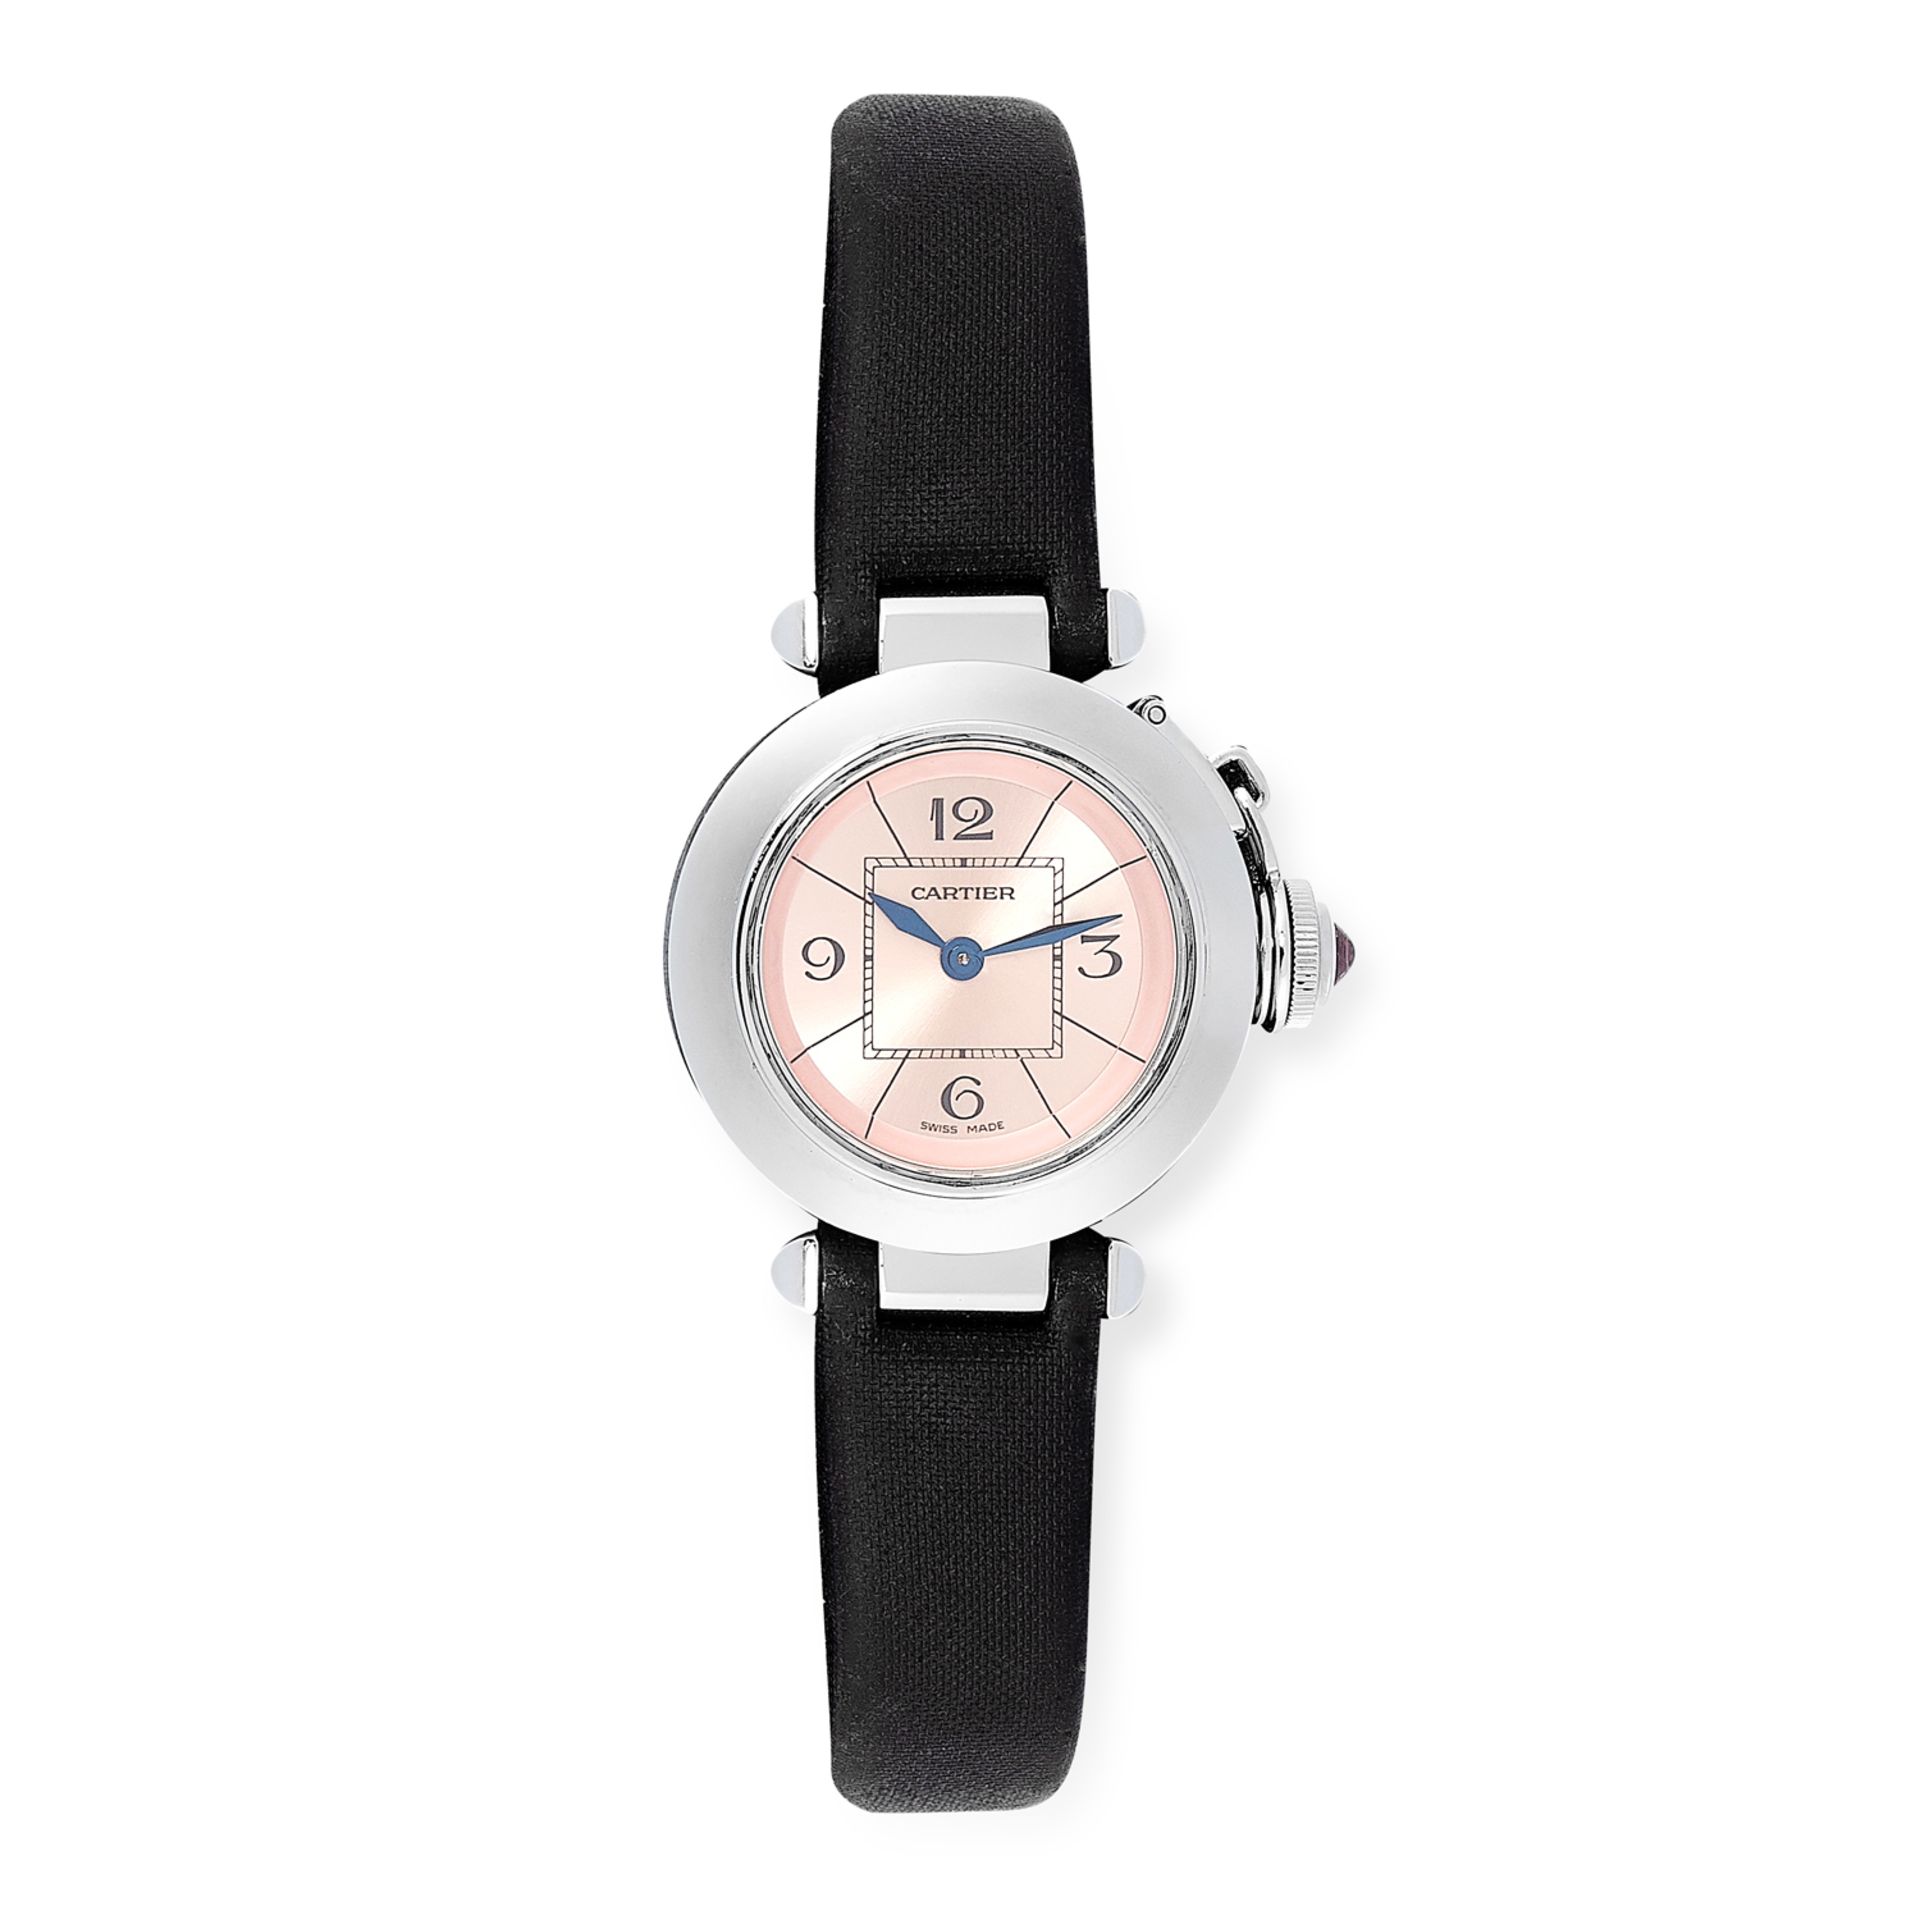 A LADIES 'PASHA' WATCH, CARTIER in stainless steel, with pink dial and black strap, signed